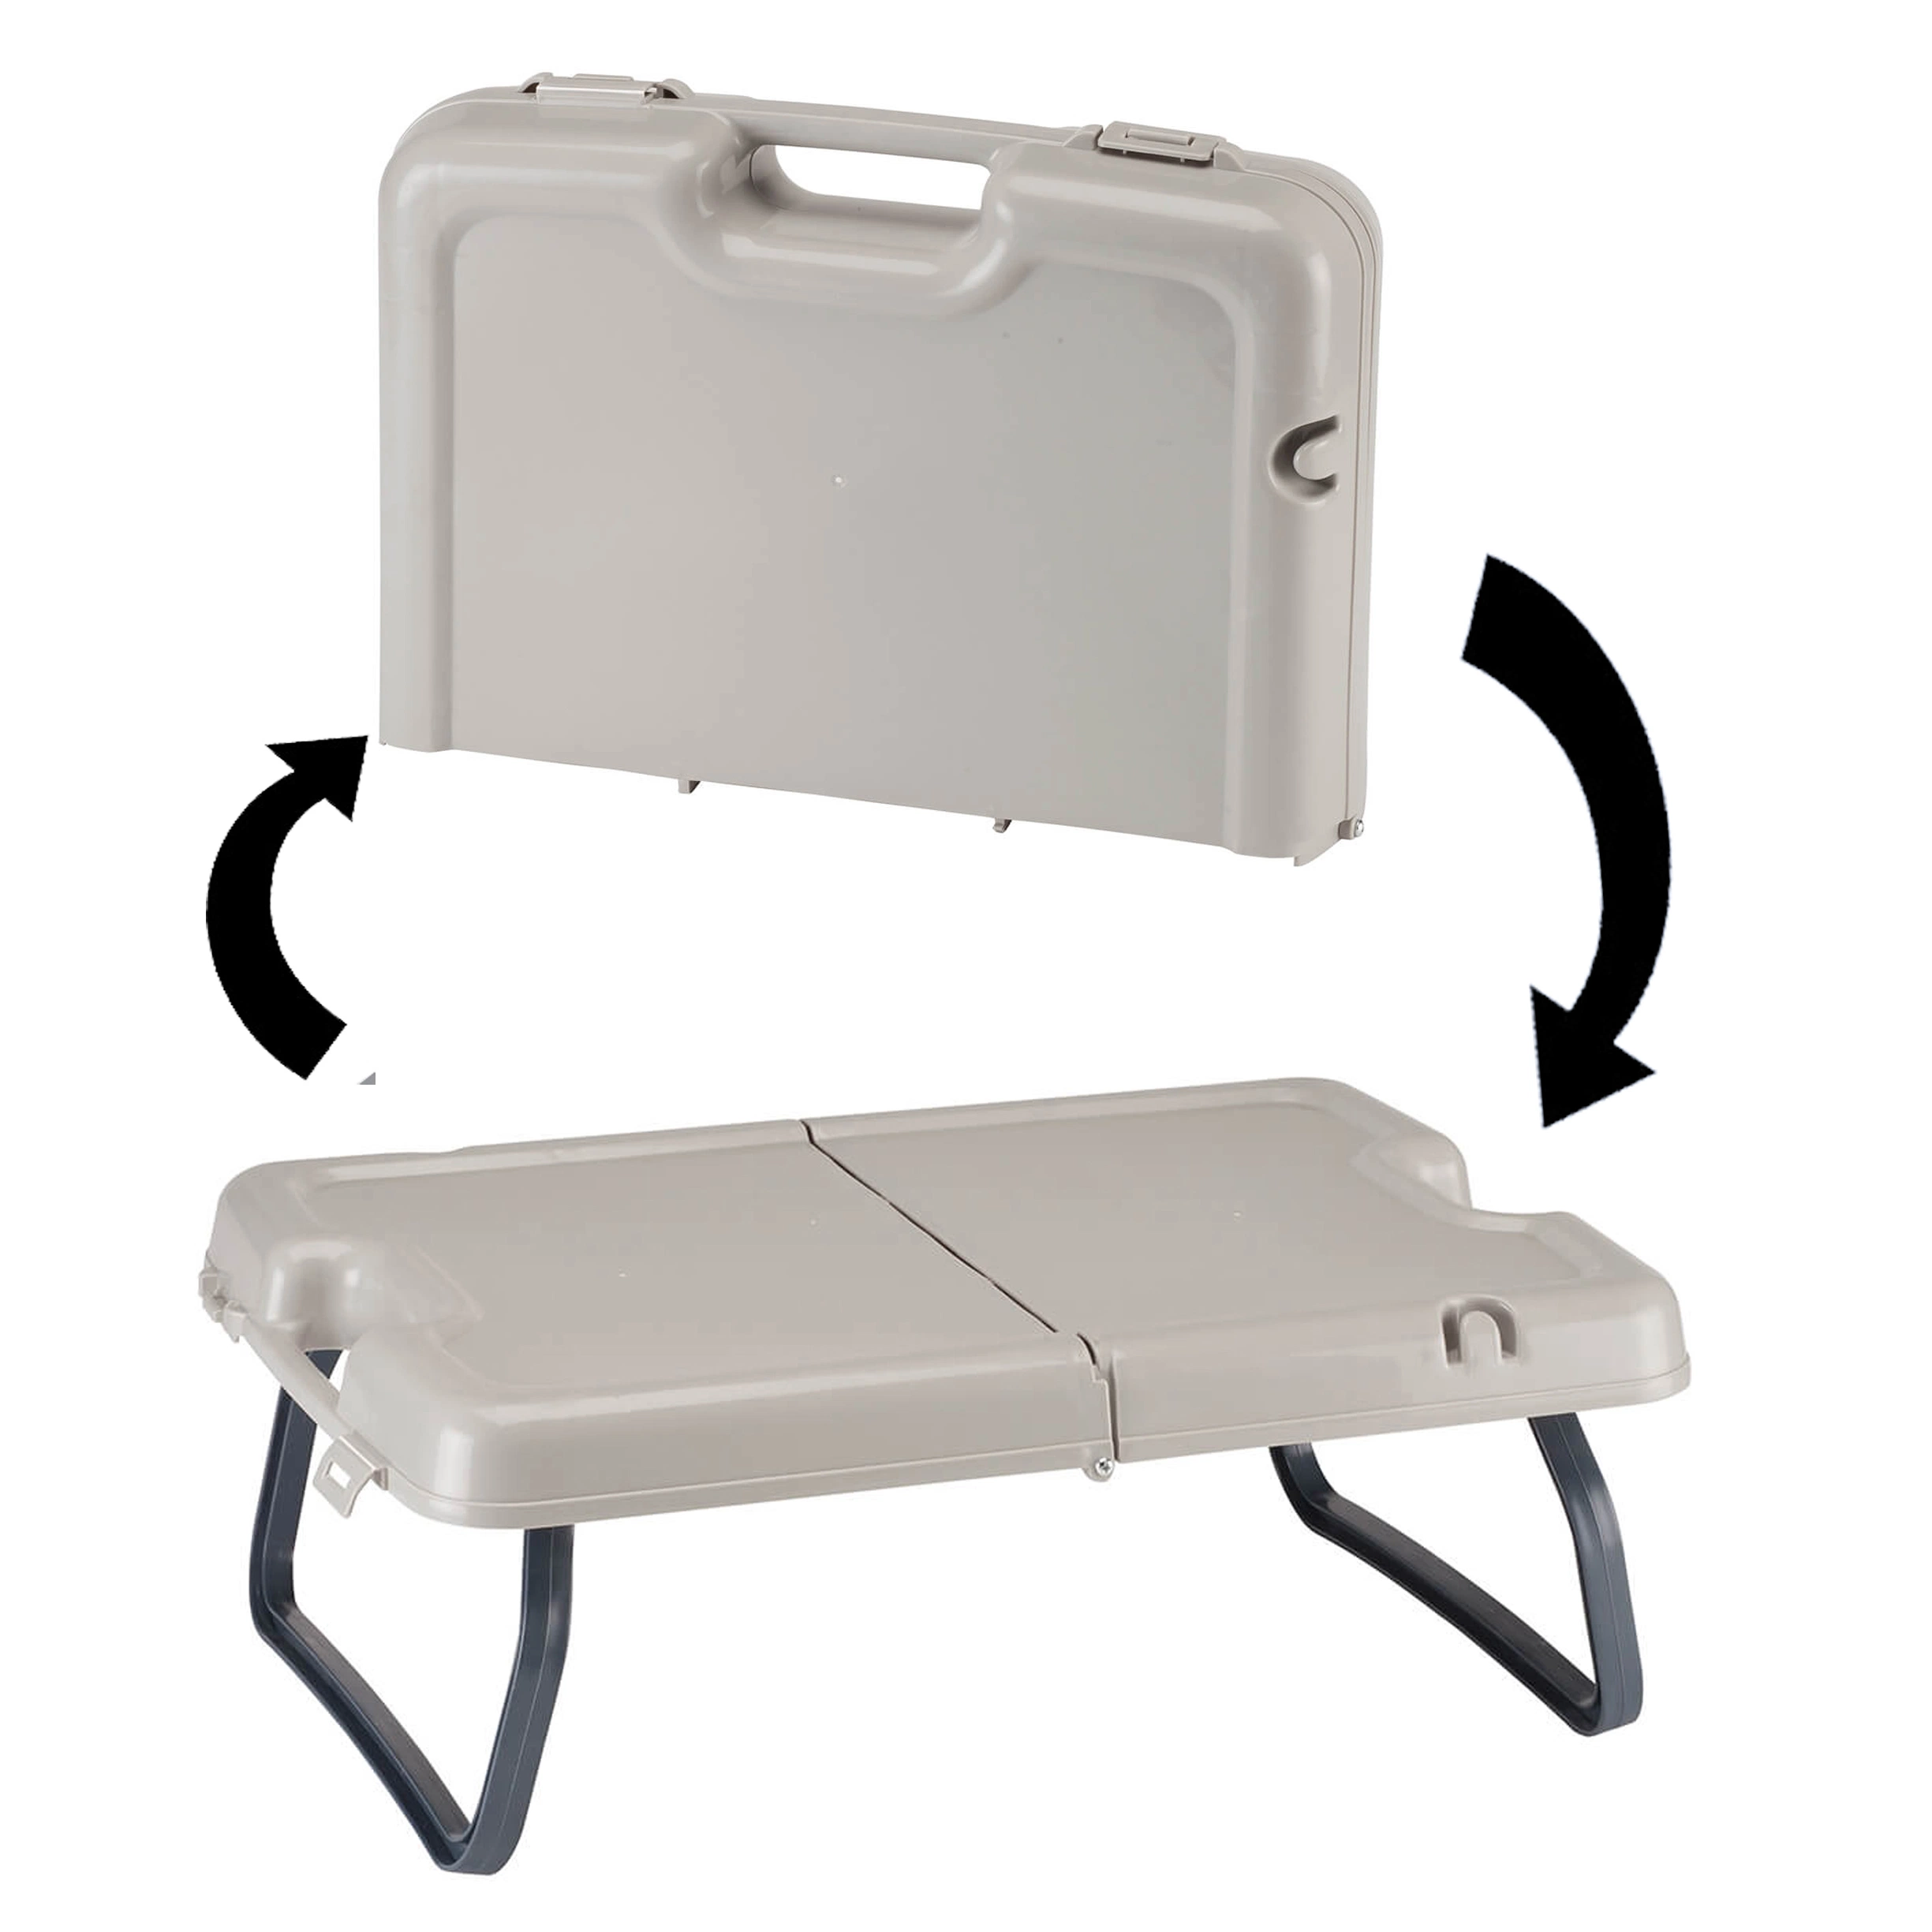 Folding Storage Case Folding Table for Camping and Picnic